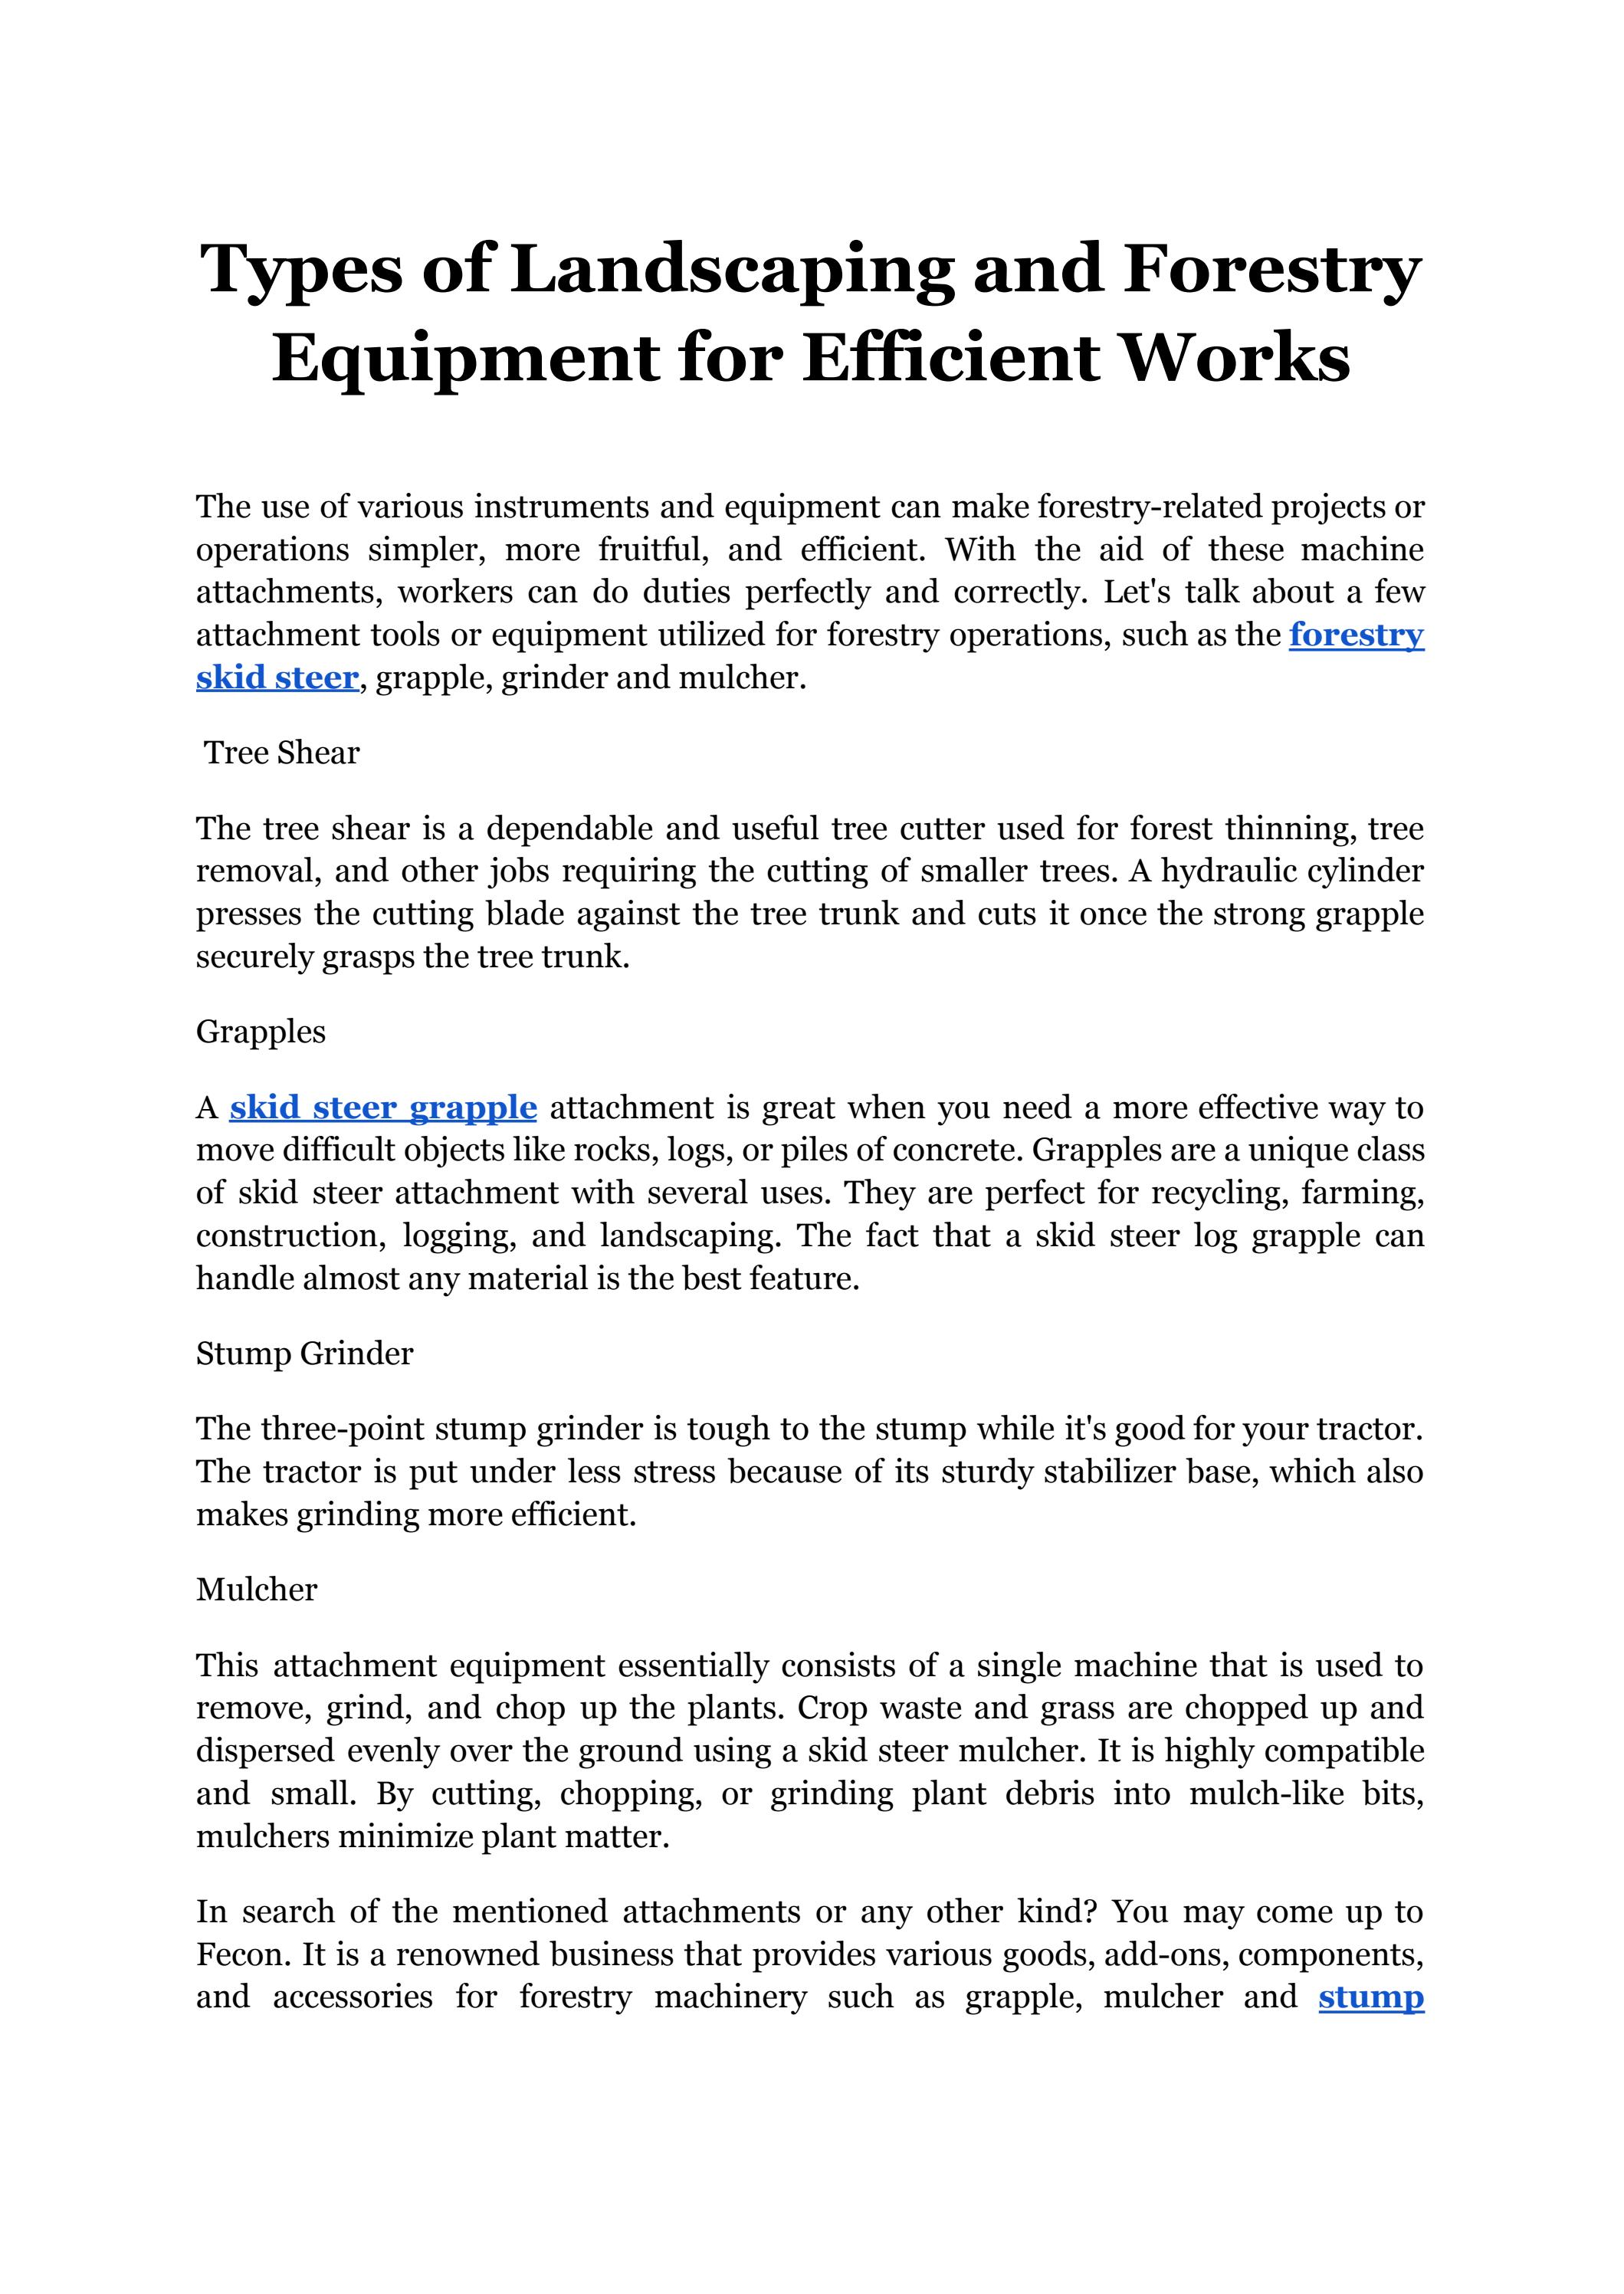 Types of Landscaping and Forestry Equipment for Efficient Works